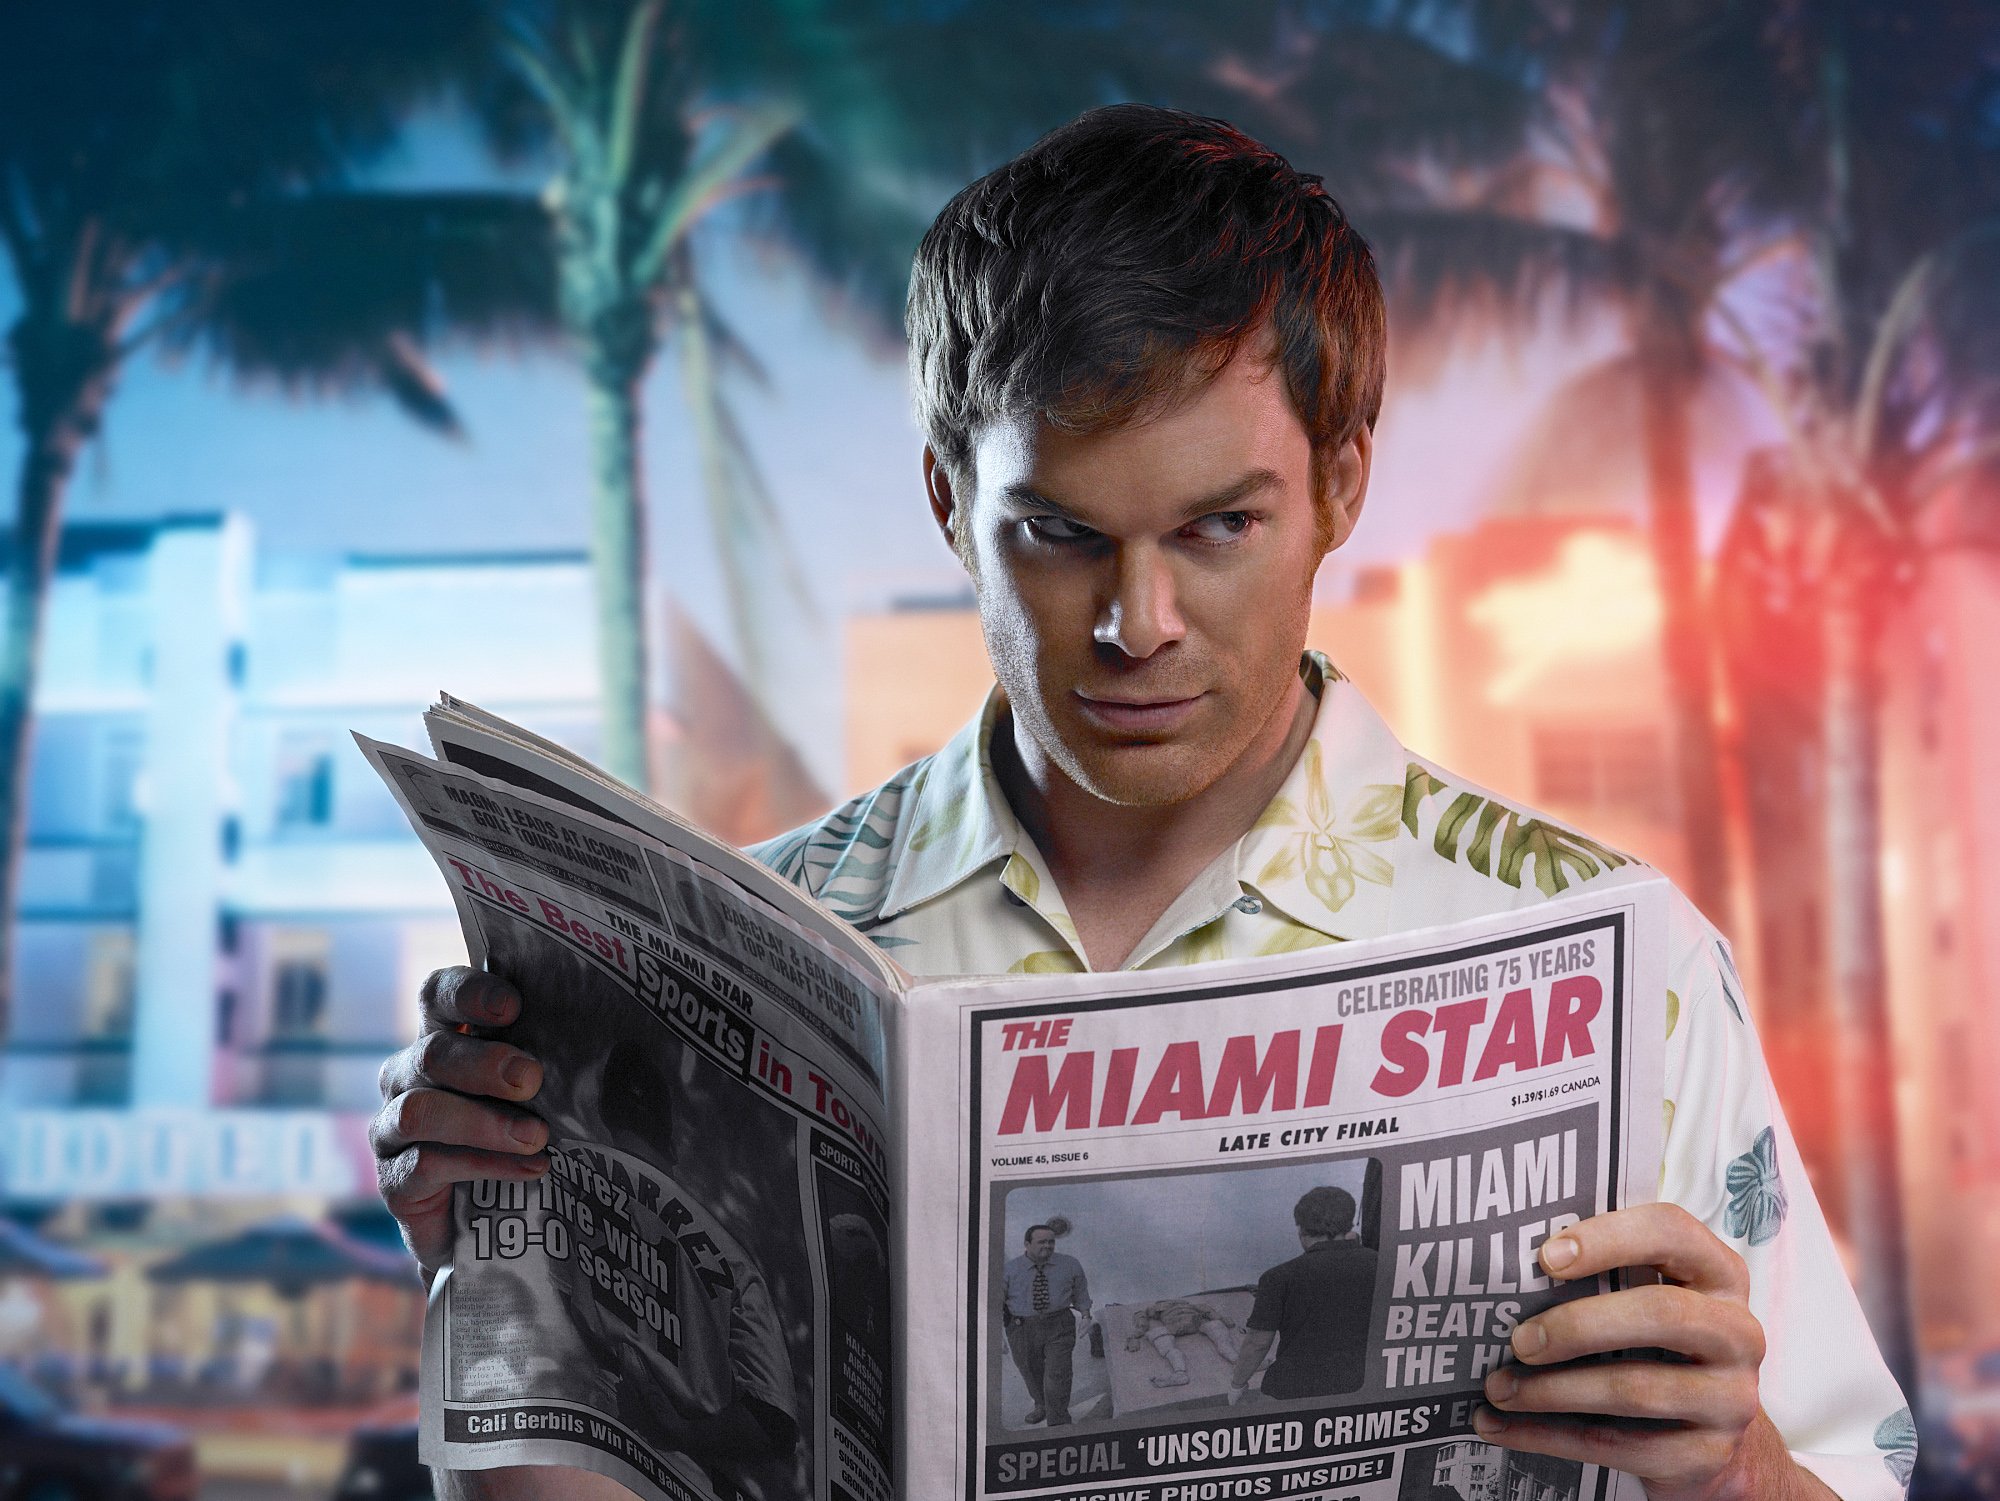 Michael C. Hall returns as Dexter Morgan in Dexter: New Blood. Dexter sits reading 'The Miami Star' with police lights and palm trees in the background.